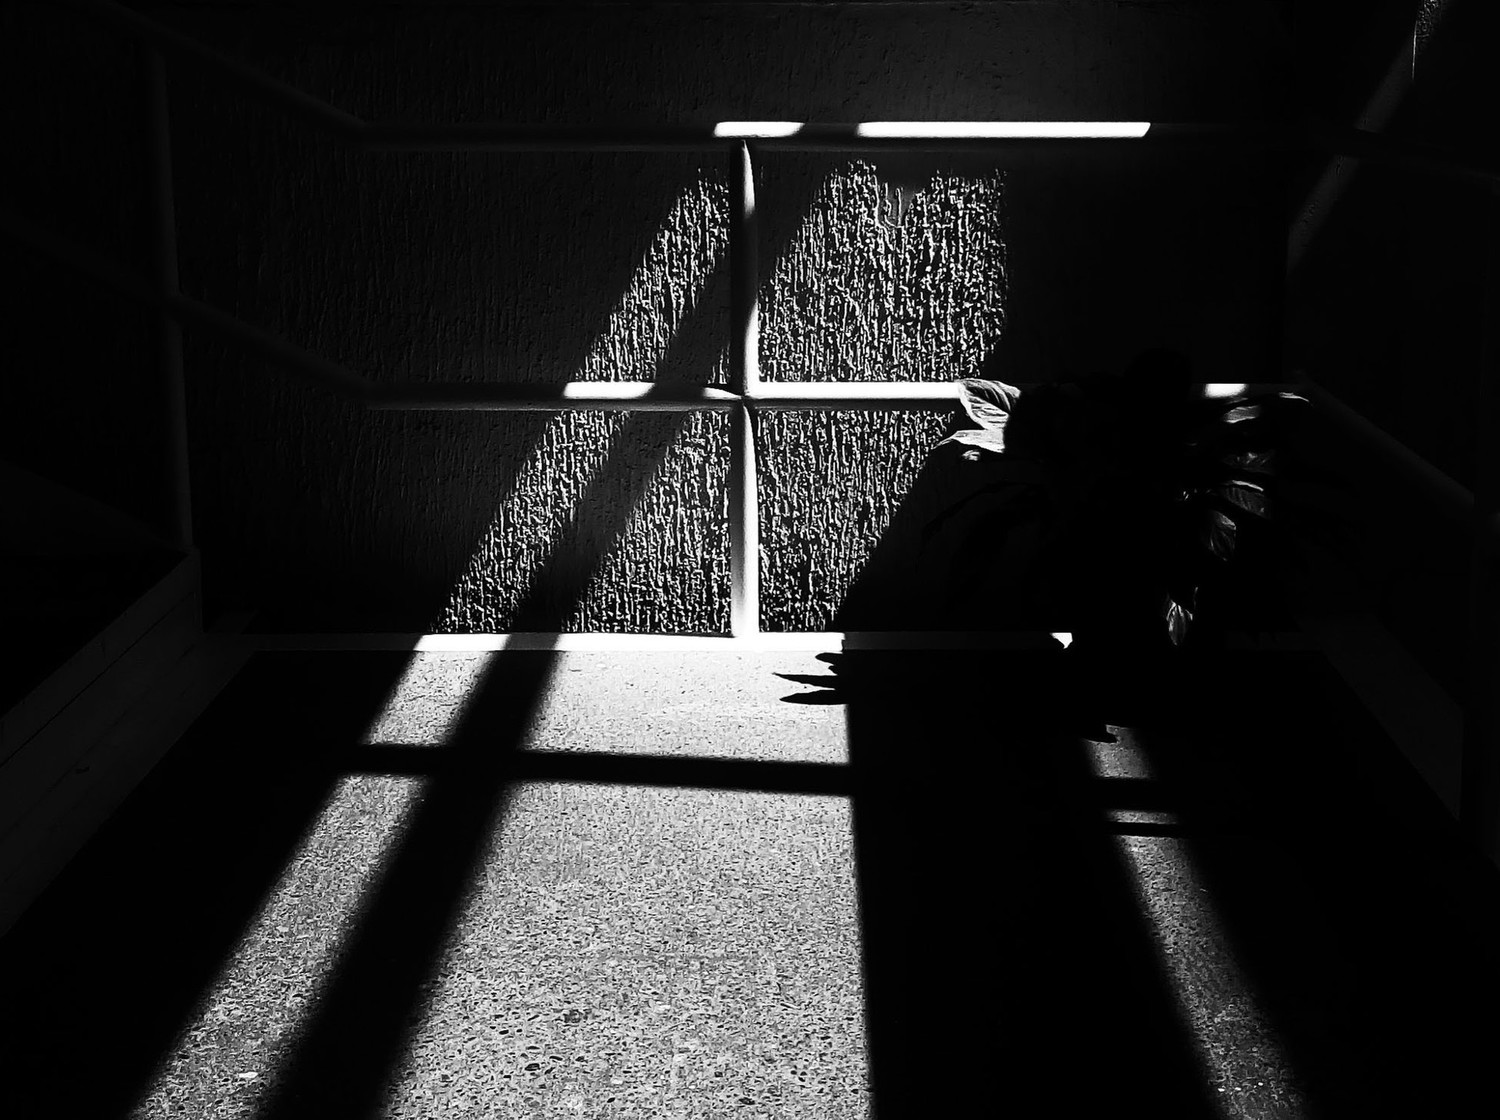 Separating Light from Shadows